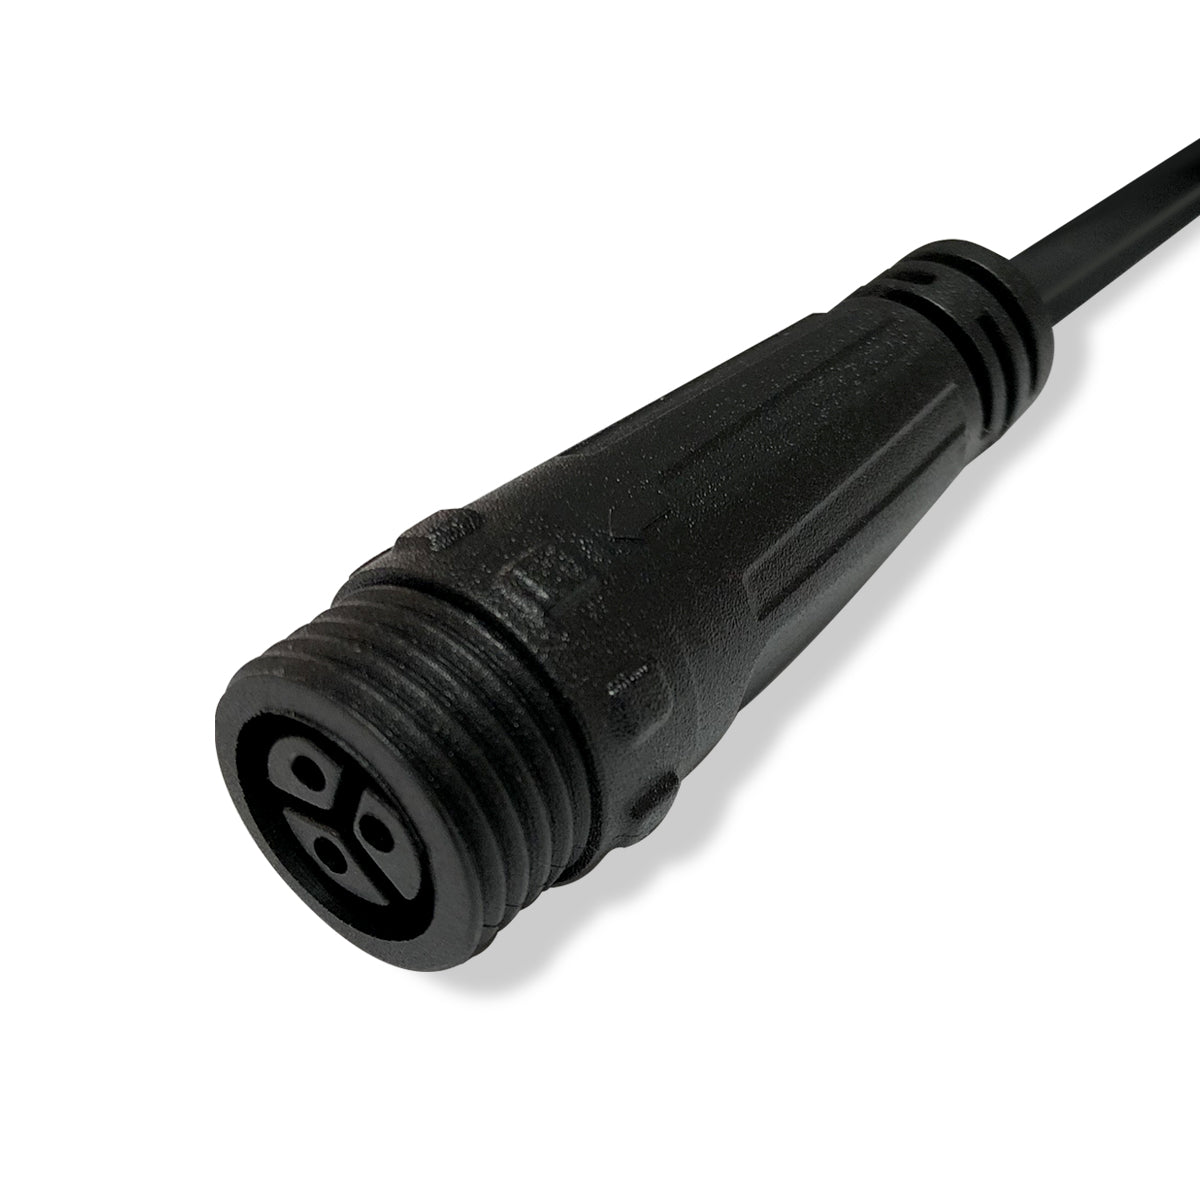 RJ12 to Threaded Waterproof Connector converter cable（ECS-3）